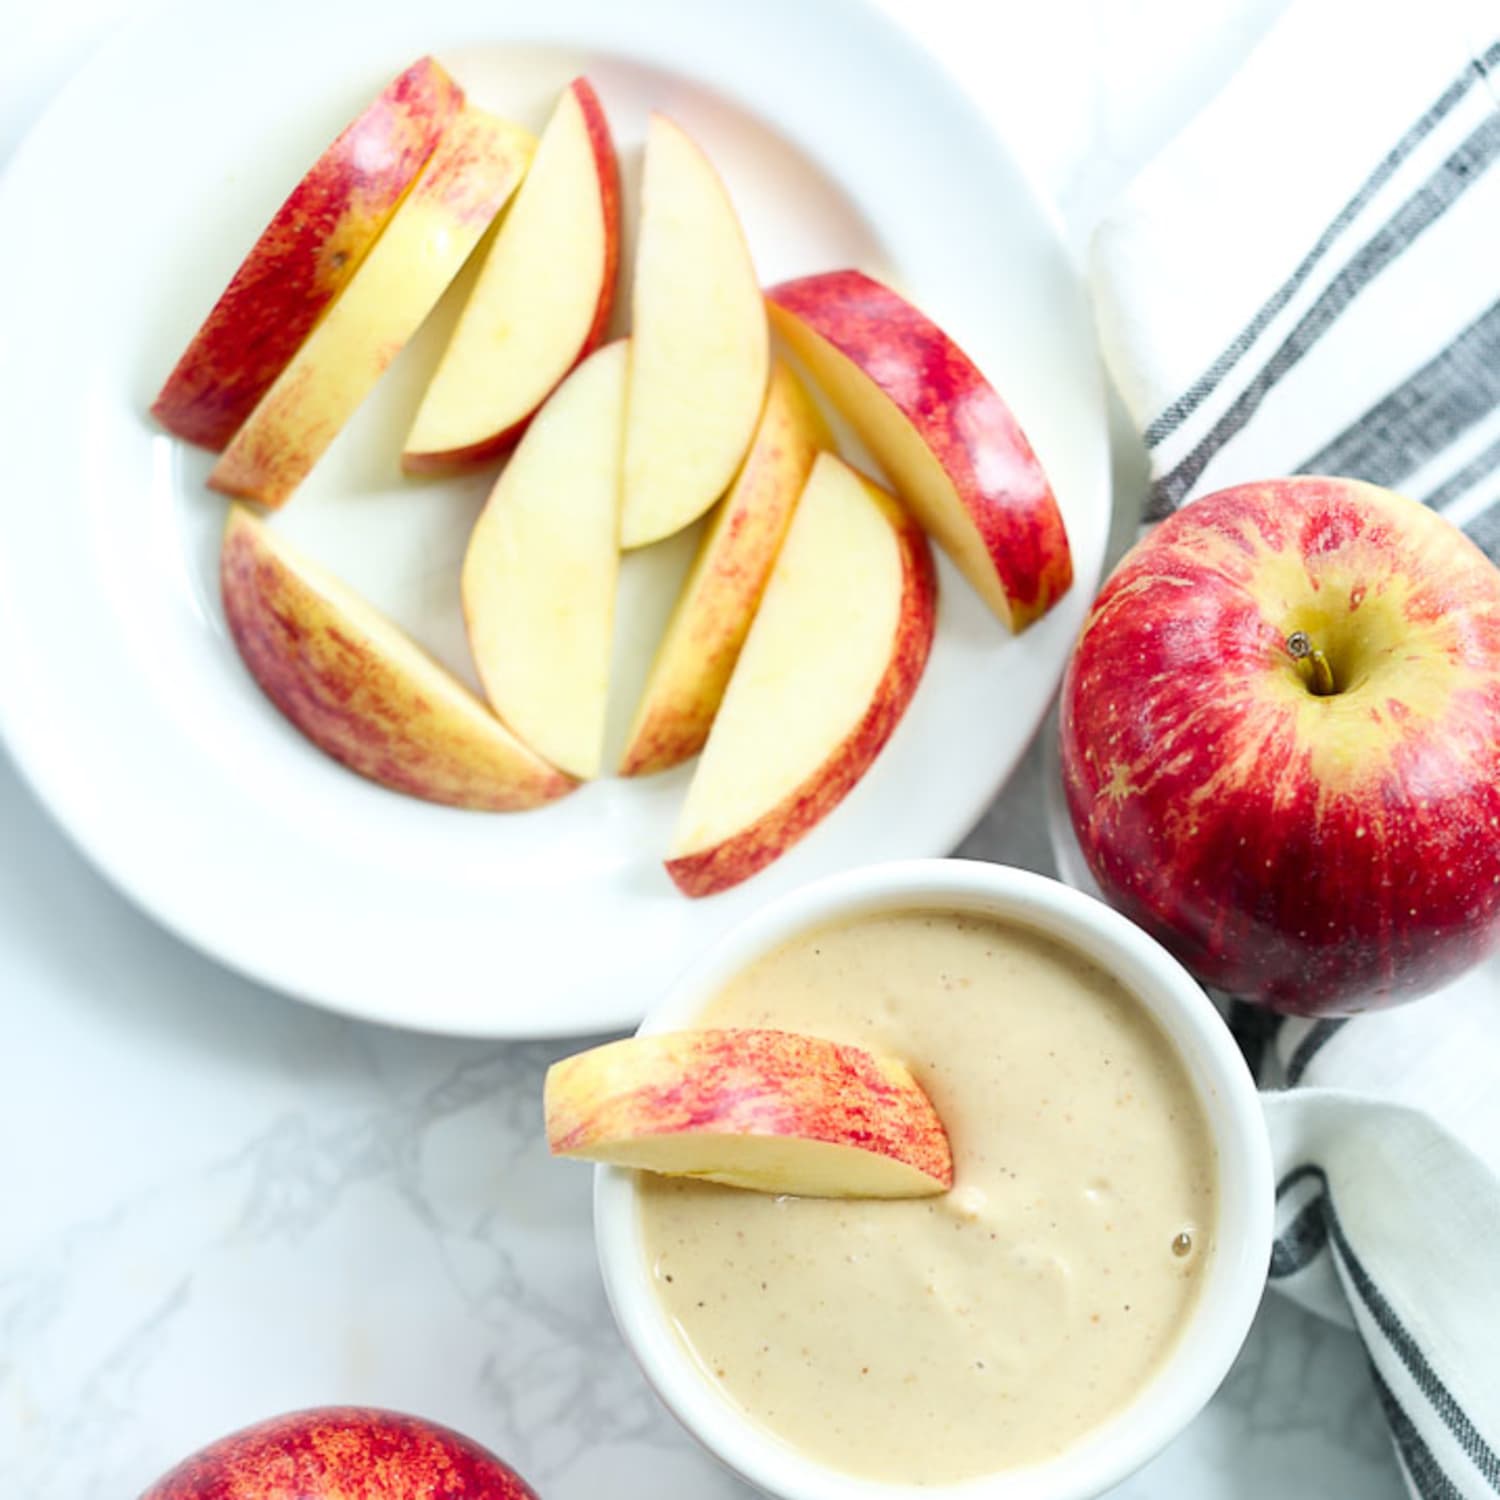 10 Ways to Keep Apple Slices from Browning - Insanely Good